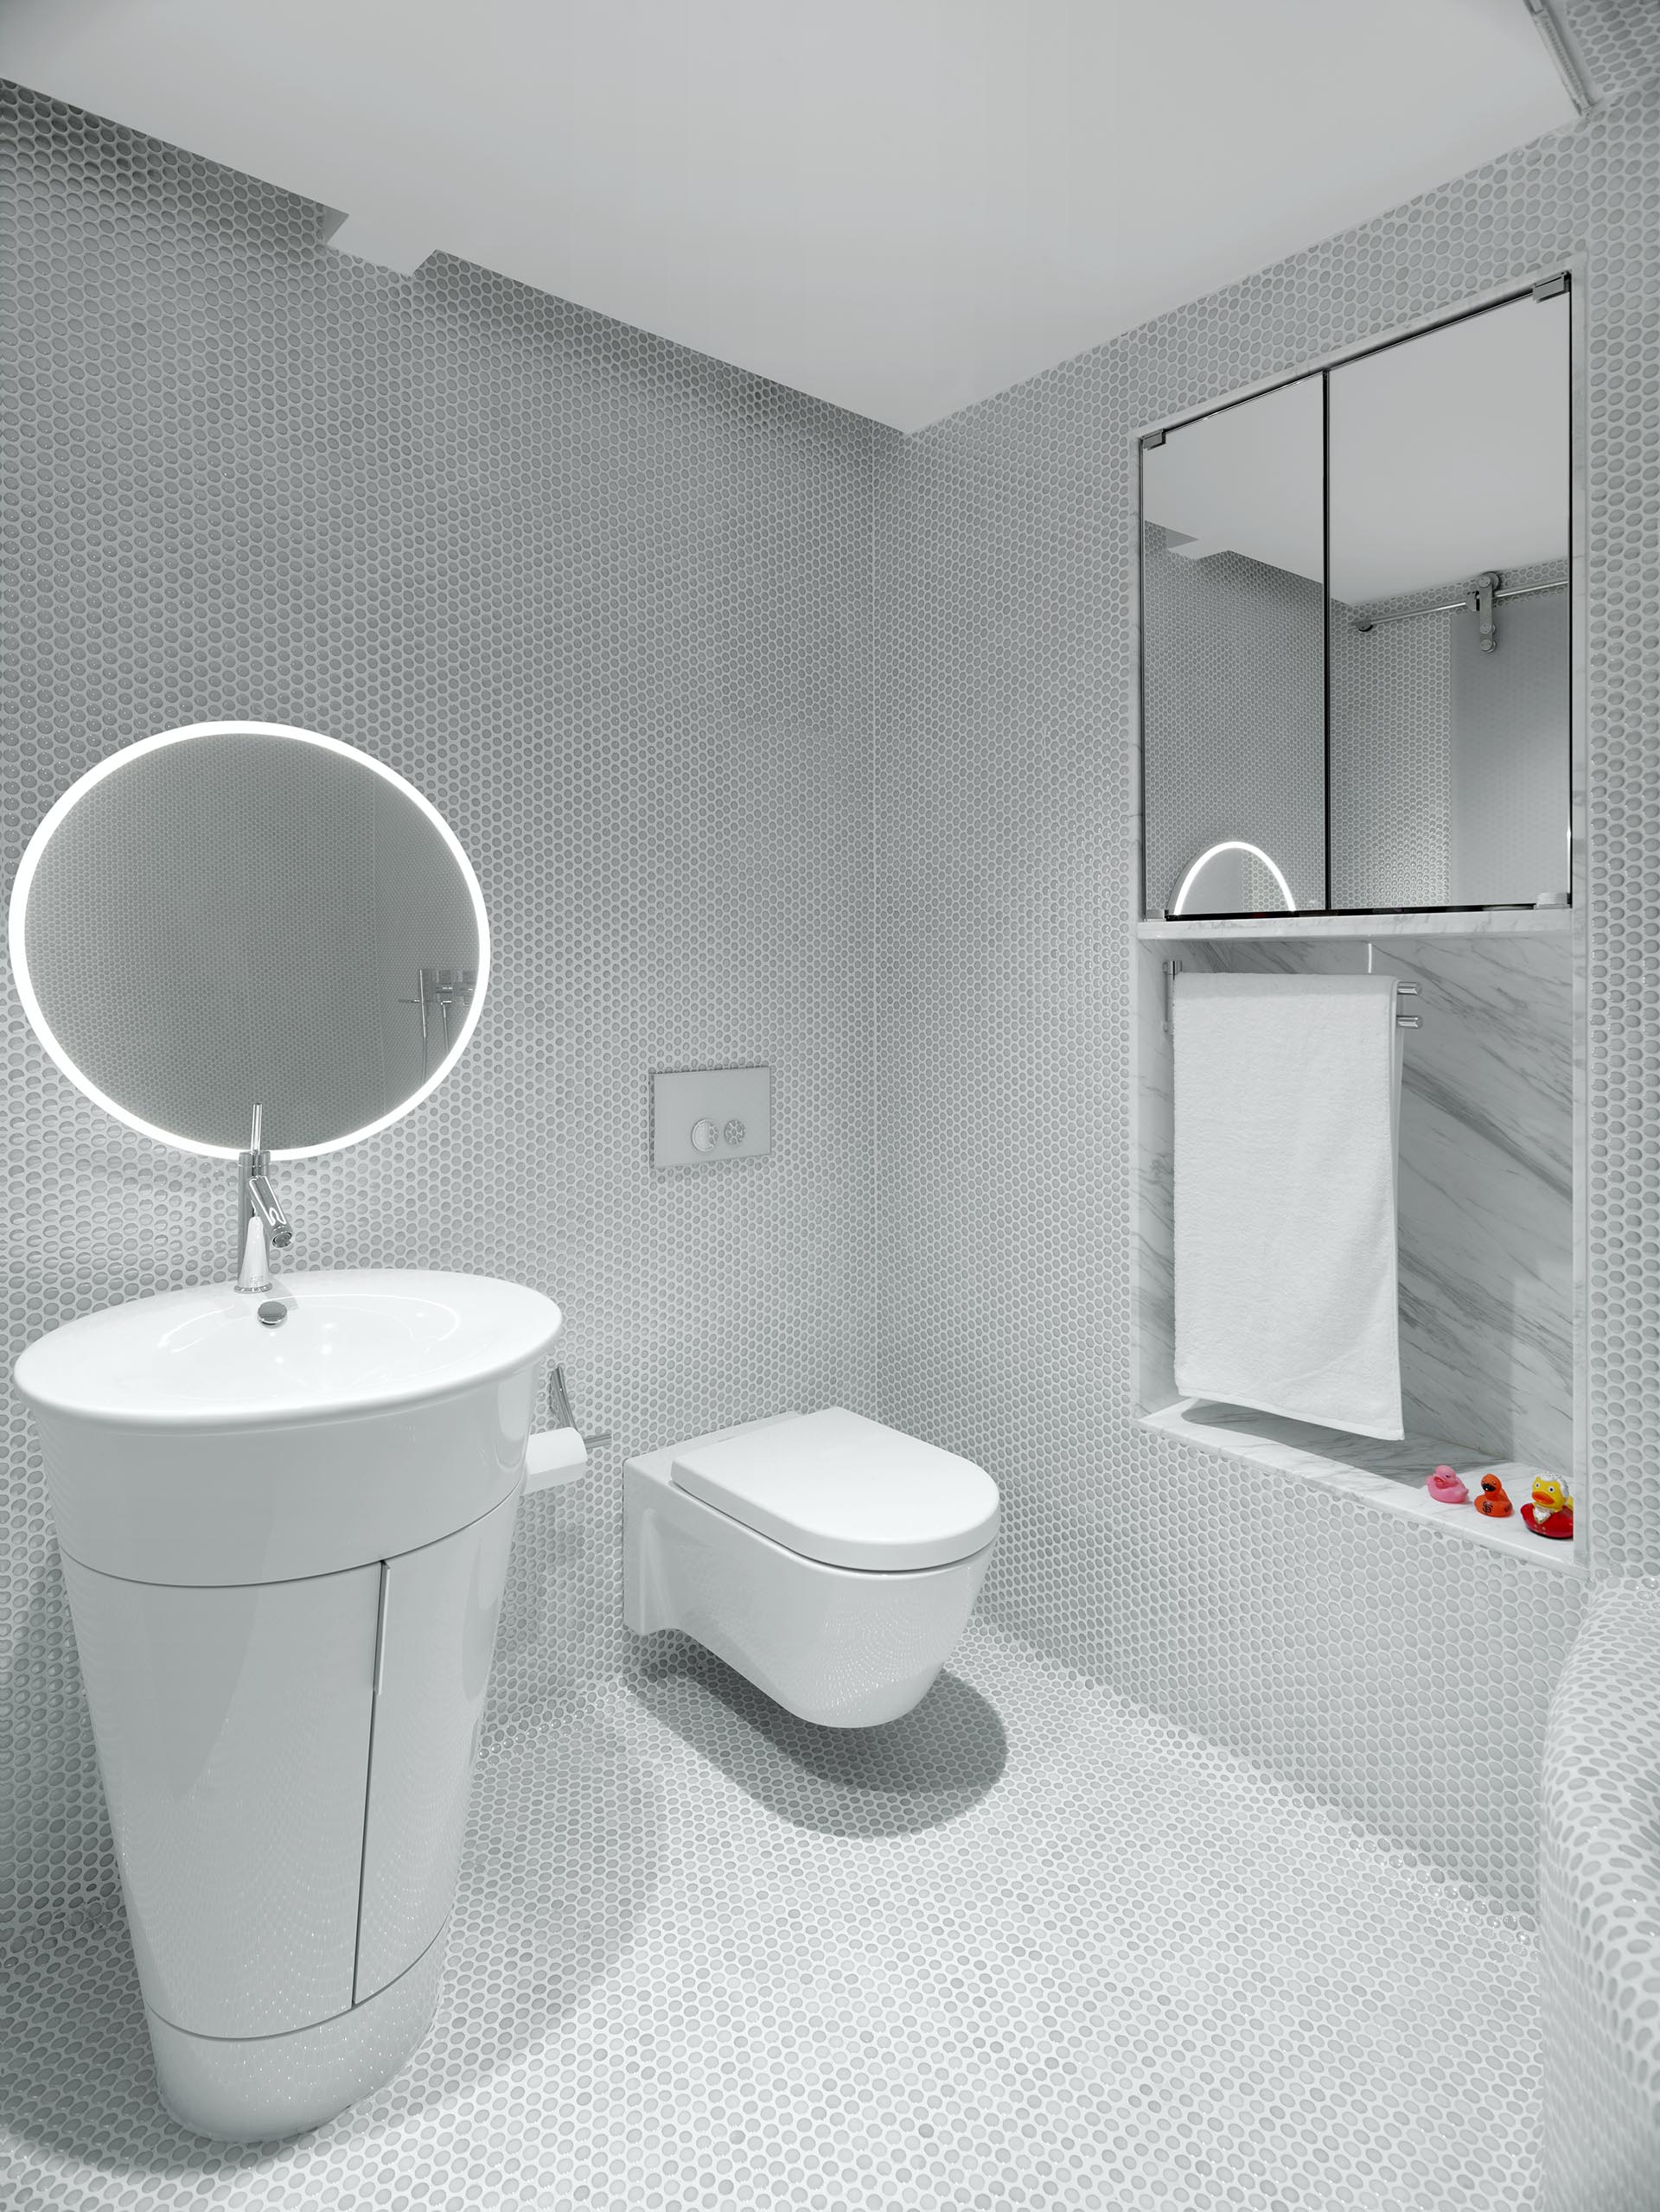 A white bathroom covered in penny tiles, that also has a built-in mirror and shelving niche.